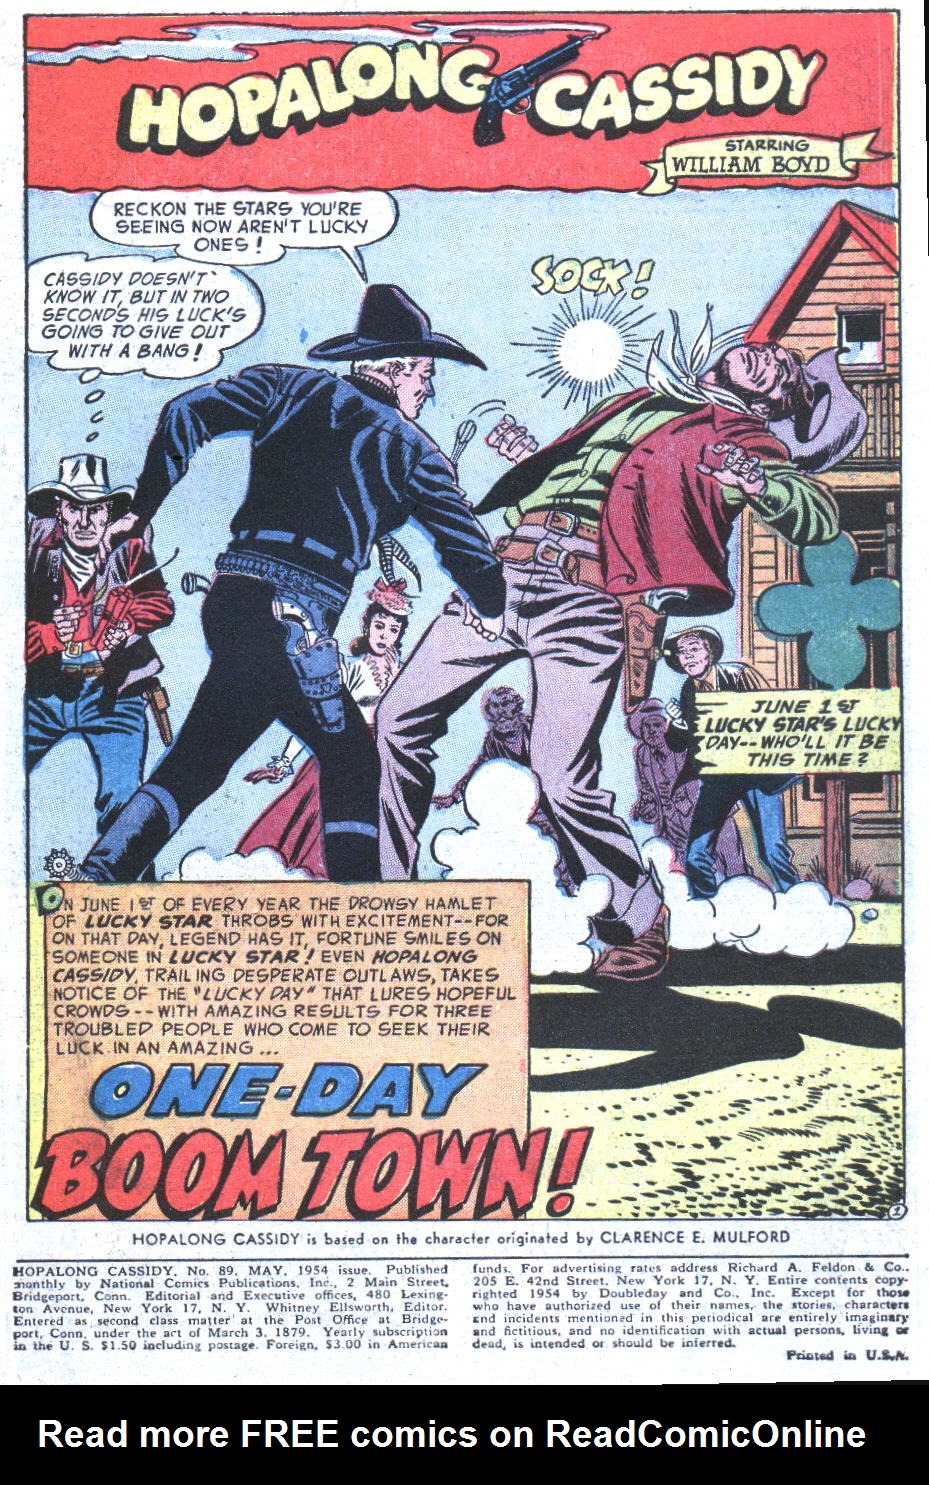 Read online Hopalong Cassidy comic -  Issue #89 - 3